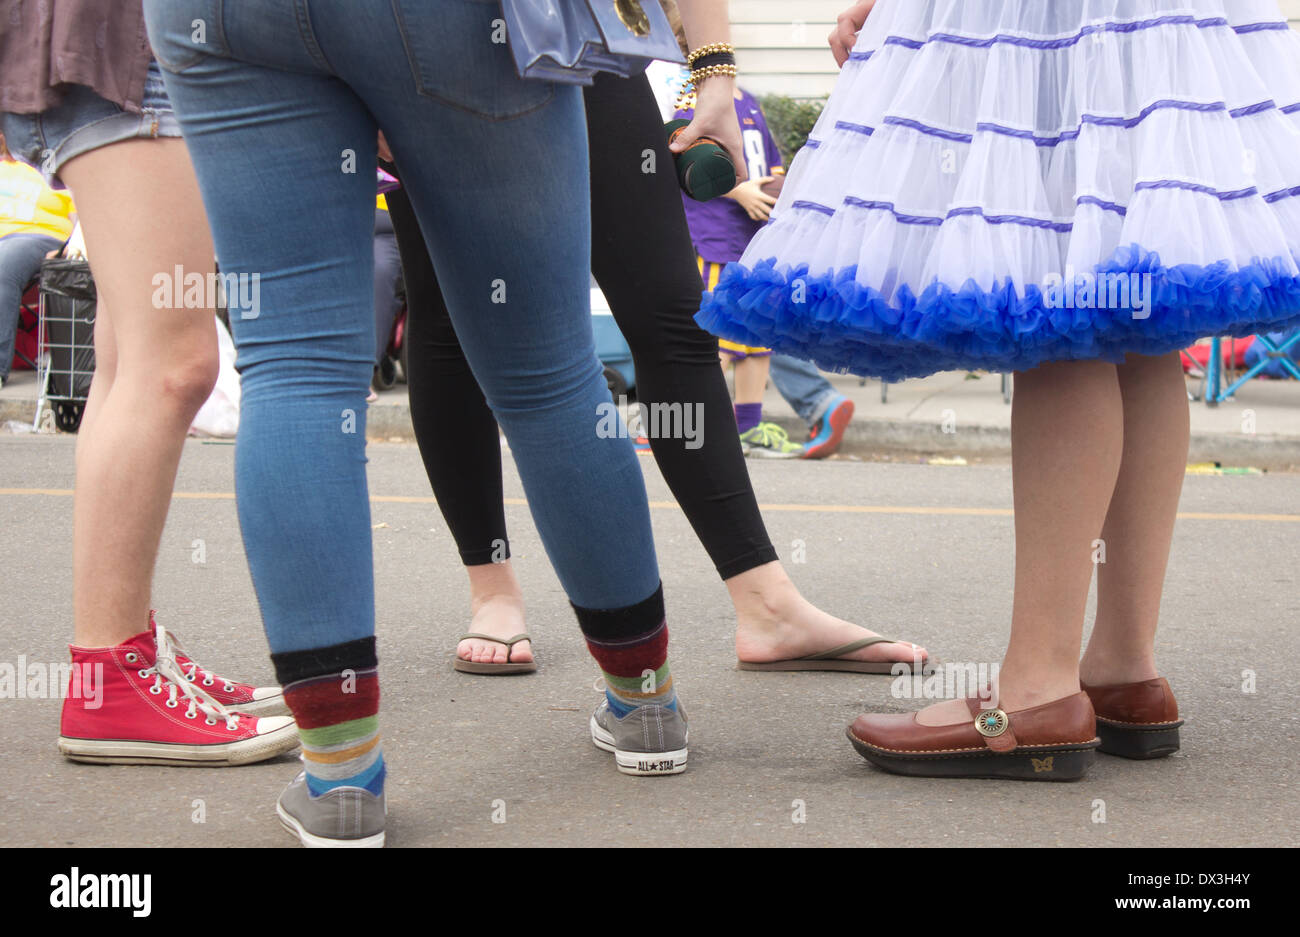 Expressive legs of four teenage girls standing in the street. Stock Photo